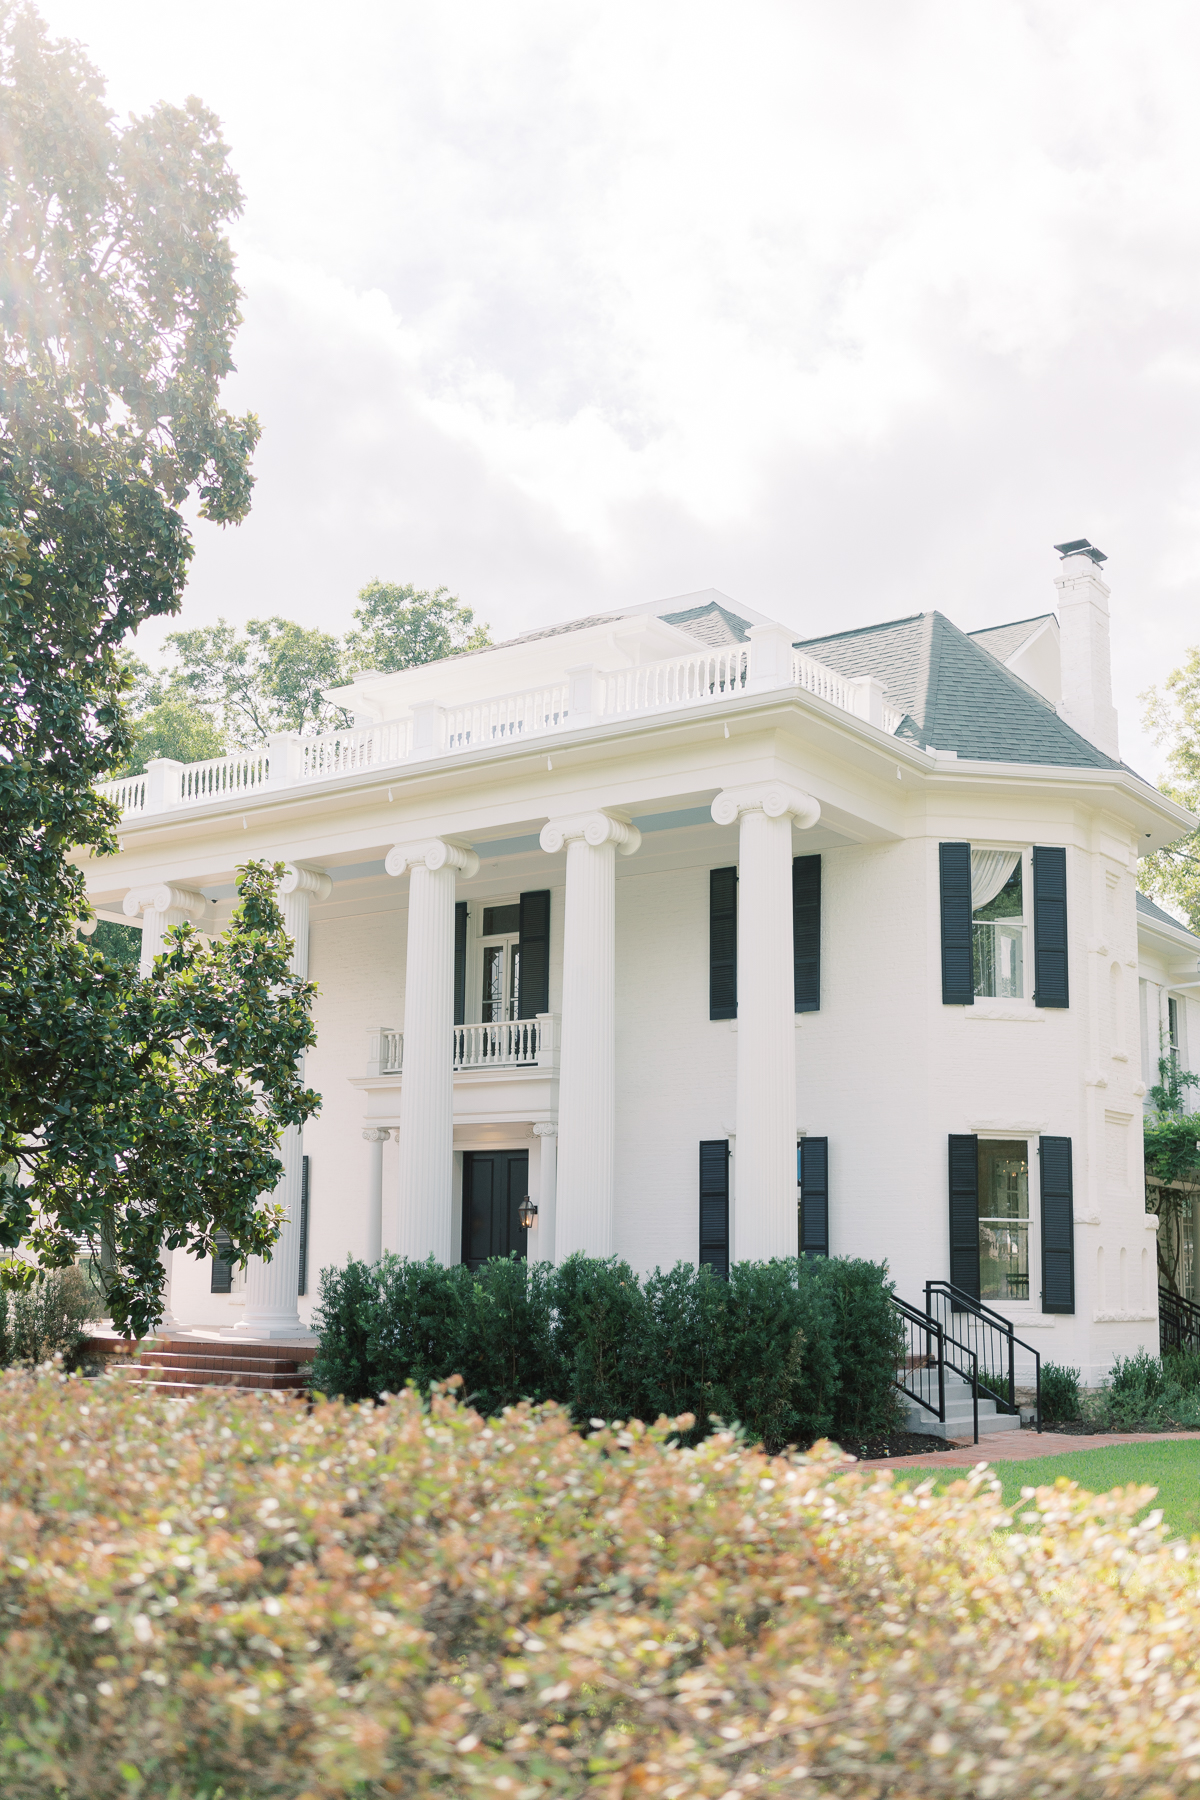 Check out this new beautiful white home wedding venue - Woodbine Mansion in Round Rock! 